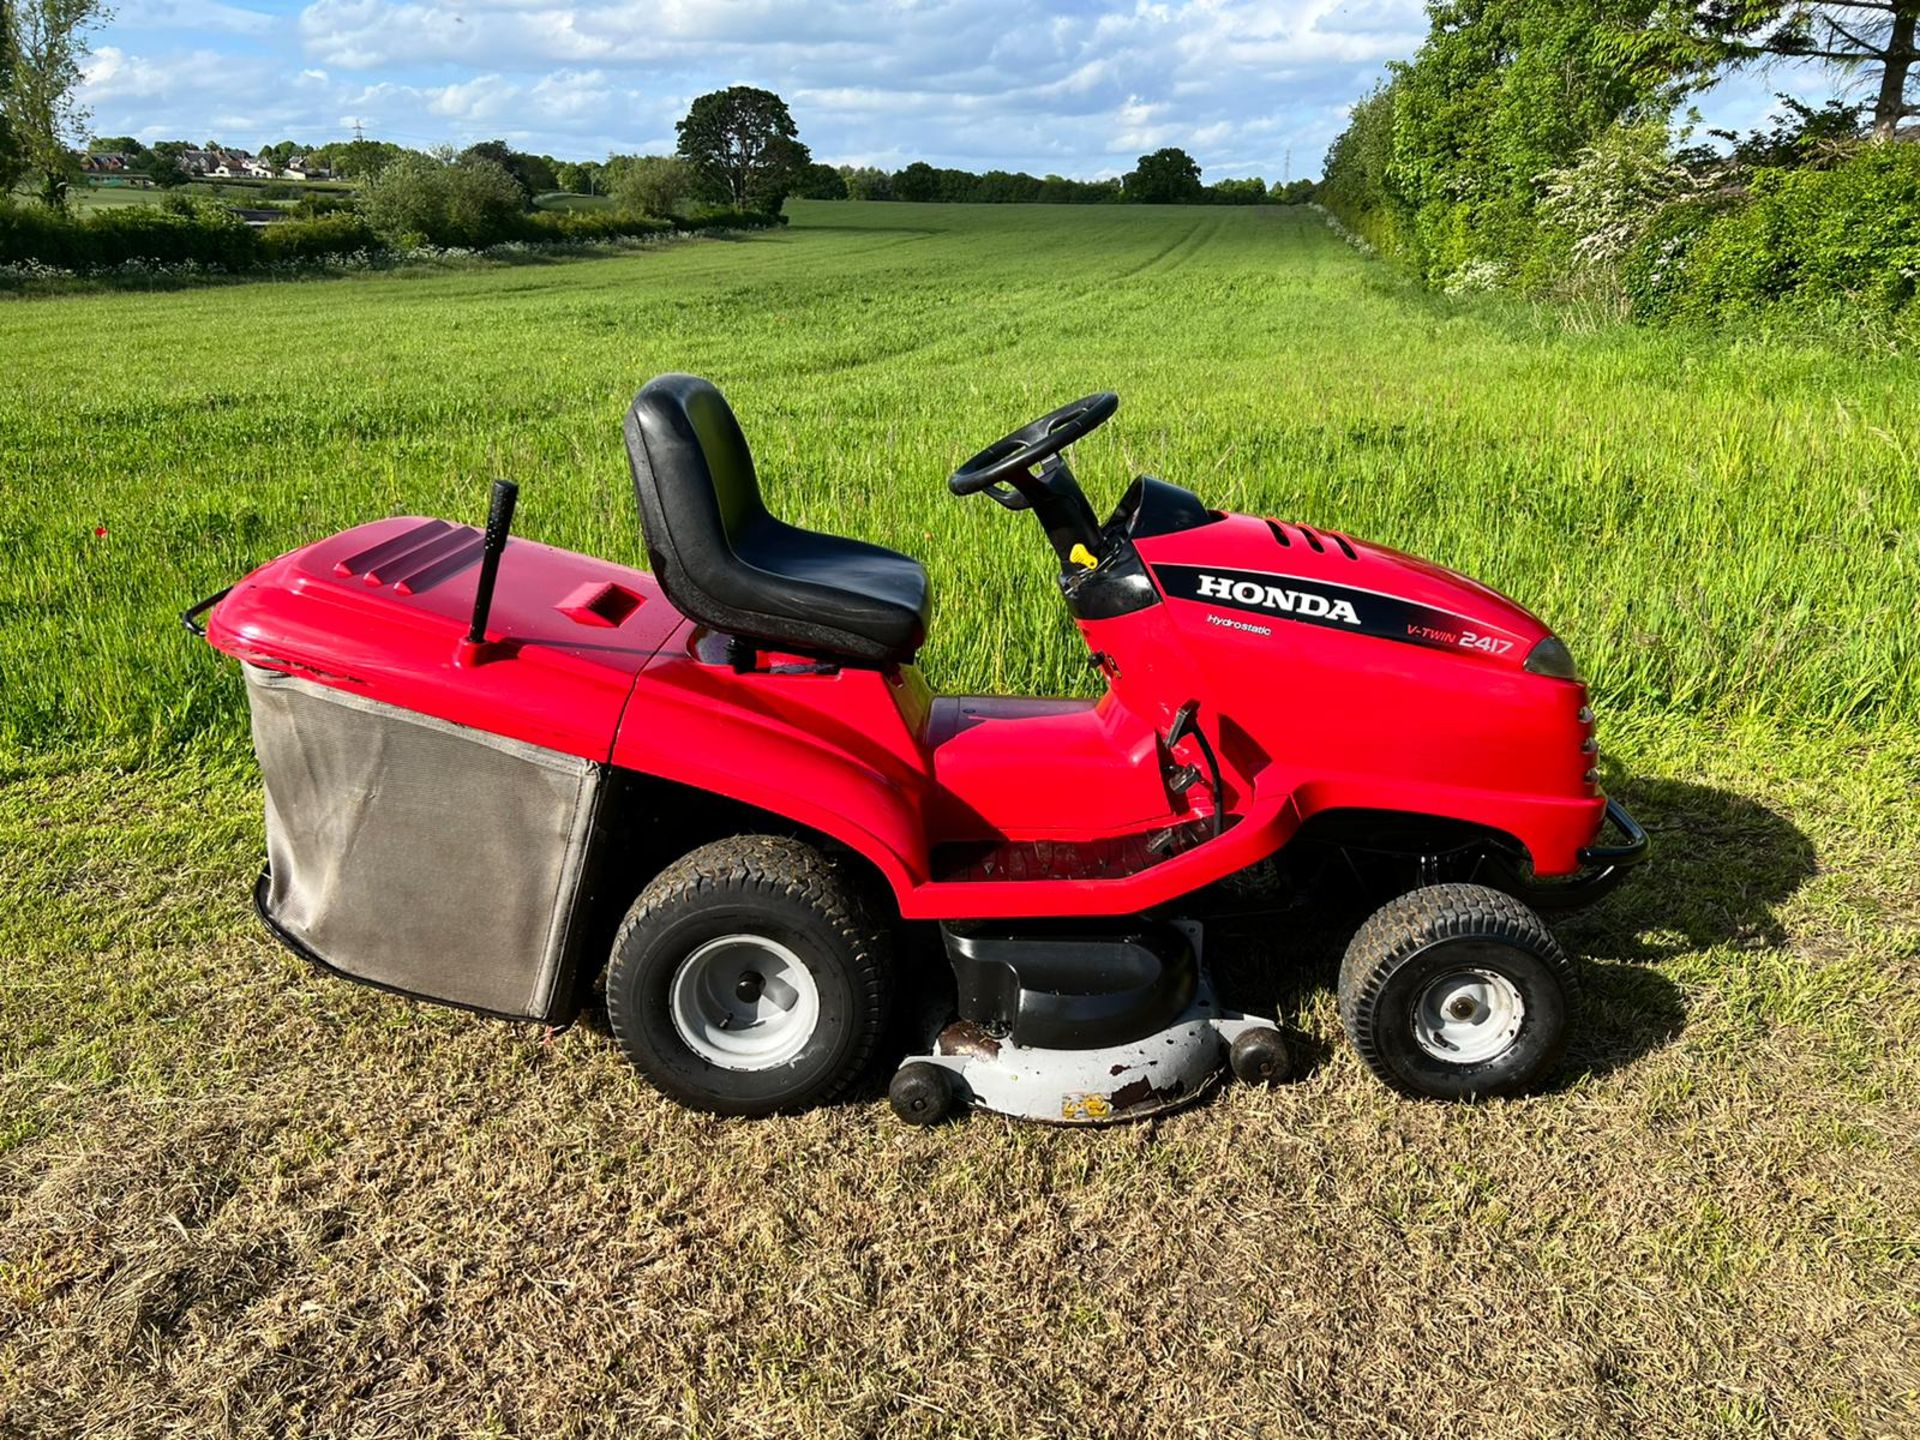 Honda 2417 Ride On Mower, Runs Drives And Cuts, Good Solid Twin Blade Deck *PLUS VAT* - Image 6 of 22